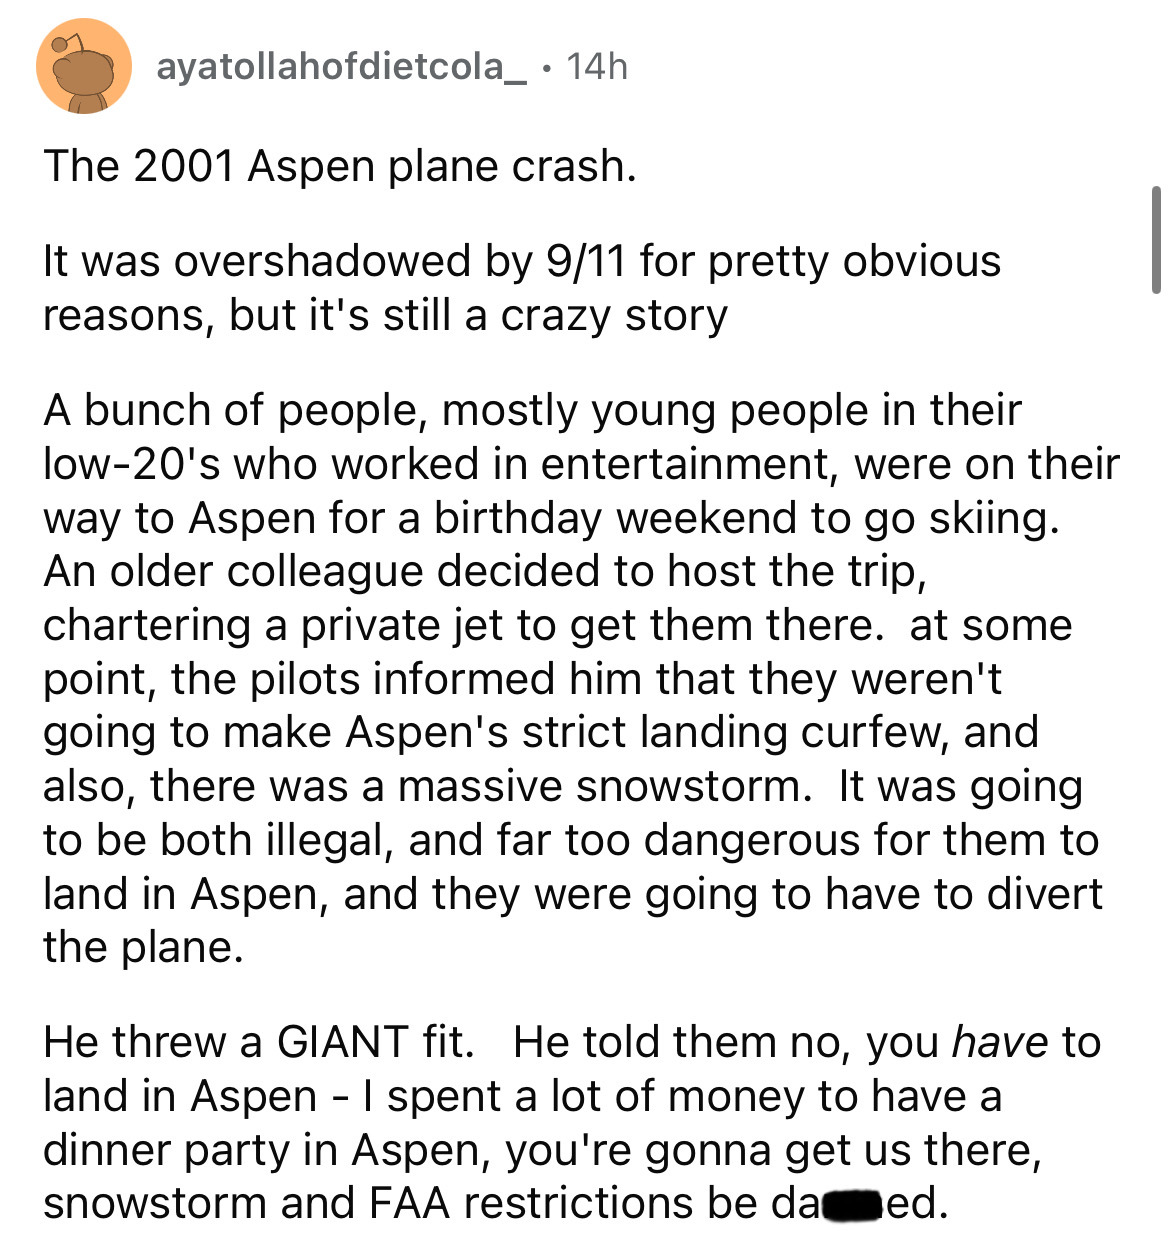 document - ayatollahofdietcola_ 14h The 2001 Aspen plane crash. It was overshadowed by 911 for pretty obvious reasons, but it's still a crazy story A bunch of people, mostly young people in their low20's who worked in entertainment, were on their way to A